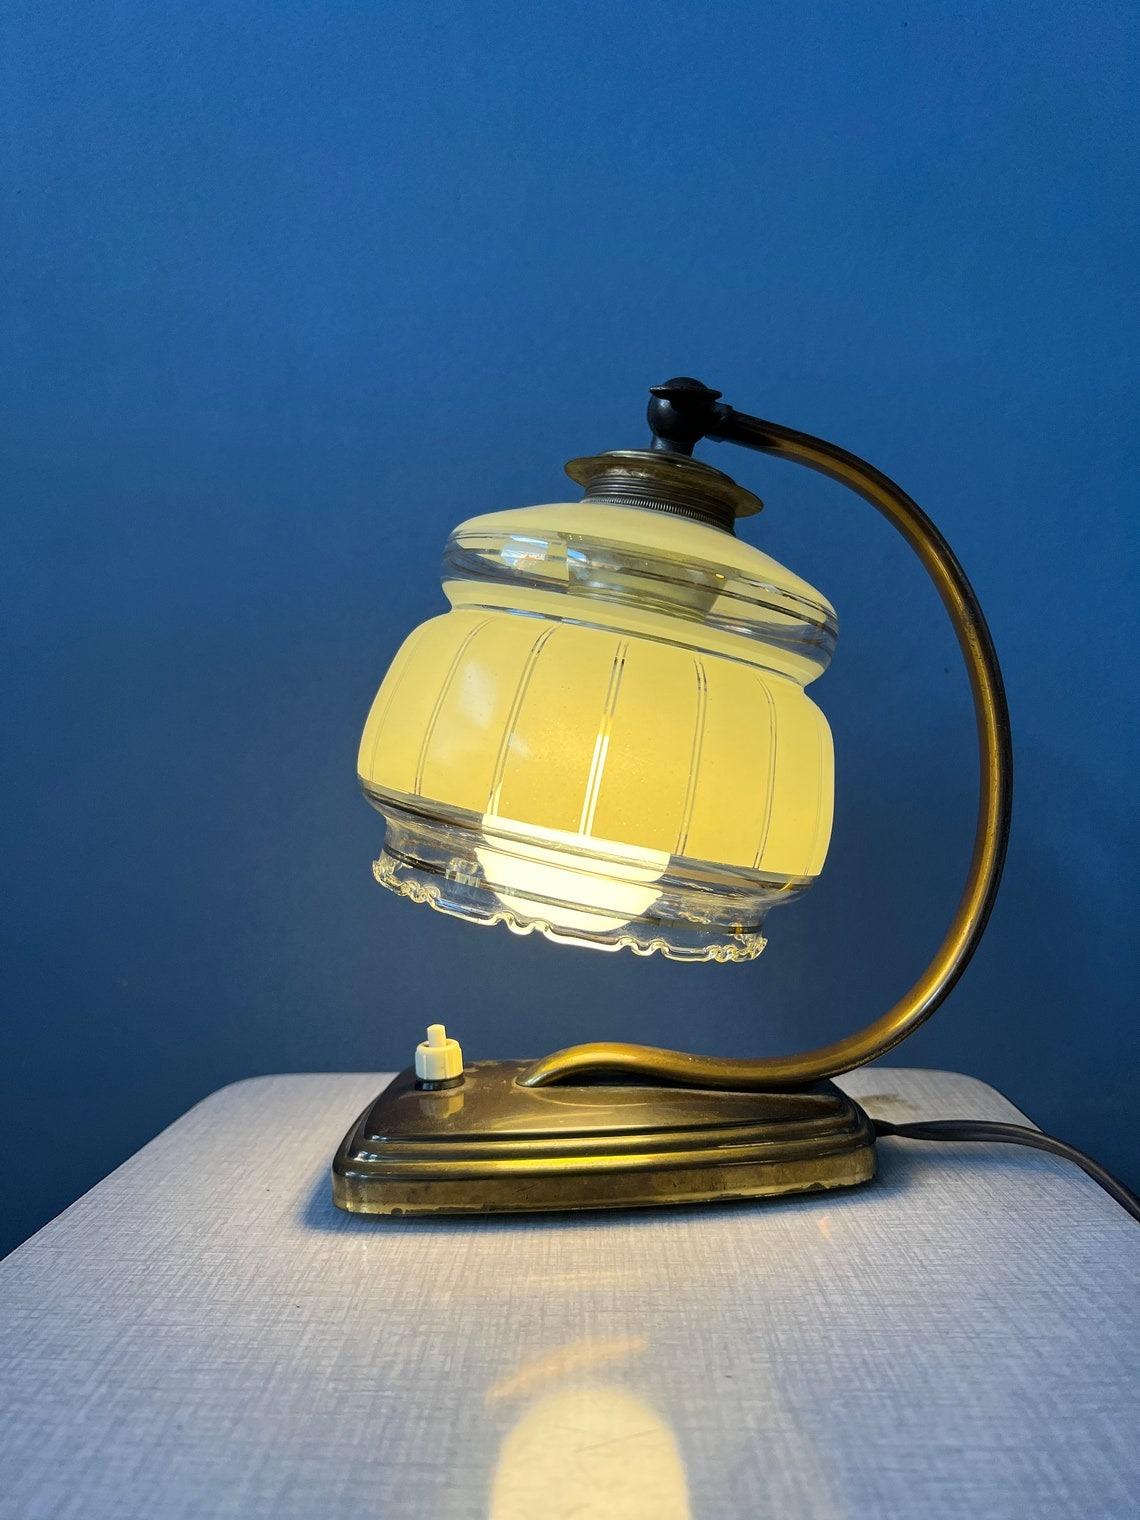 Art deco bedside table lamp with glass shade. The lamp has a bronze-coloured base and a glass shade. The lamp requires an E14 lightbulb and currently has an EU-plug.

Additional information:
Materials: Glass, metal
Period: 1970s
Dimensions: ø Shade: